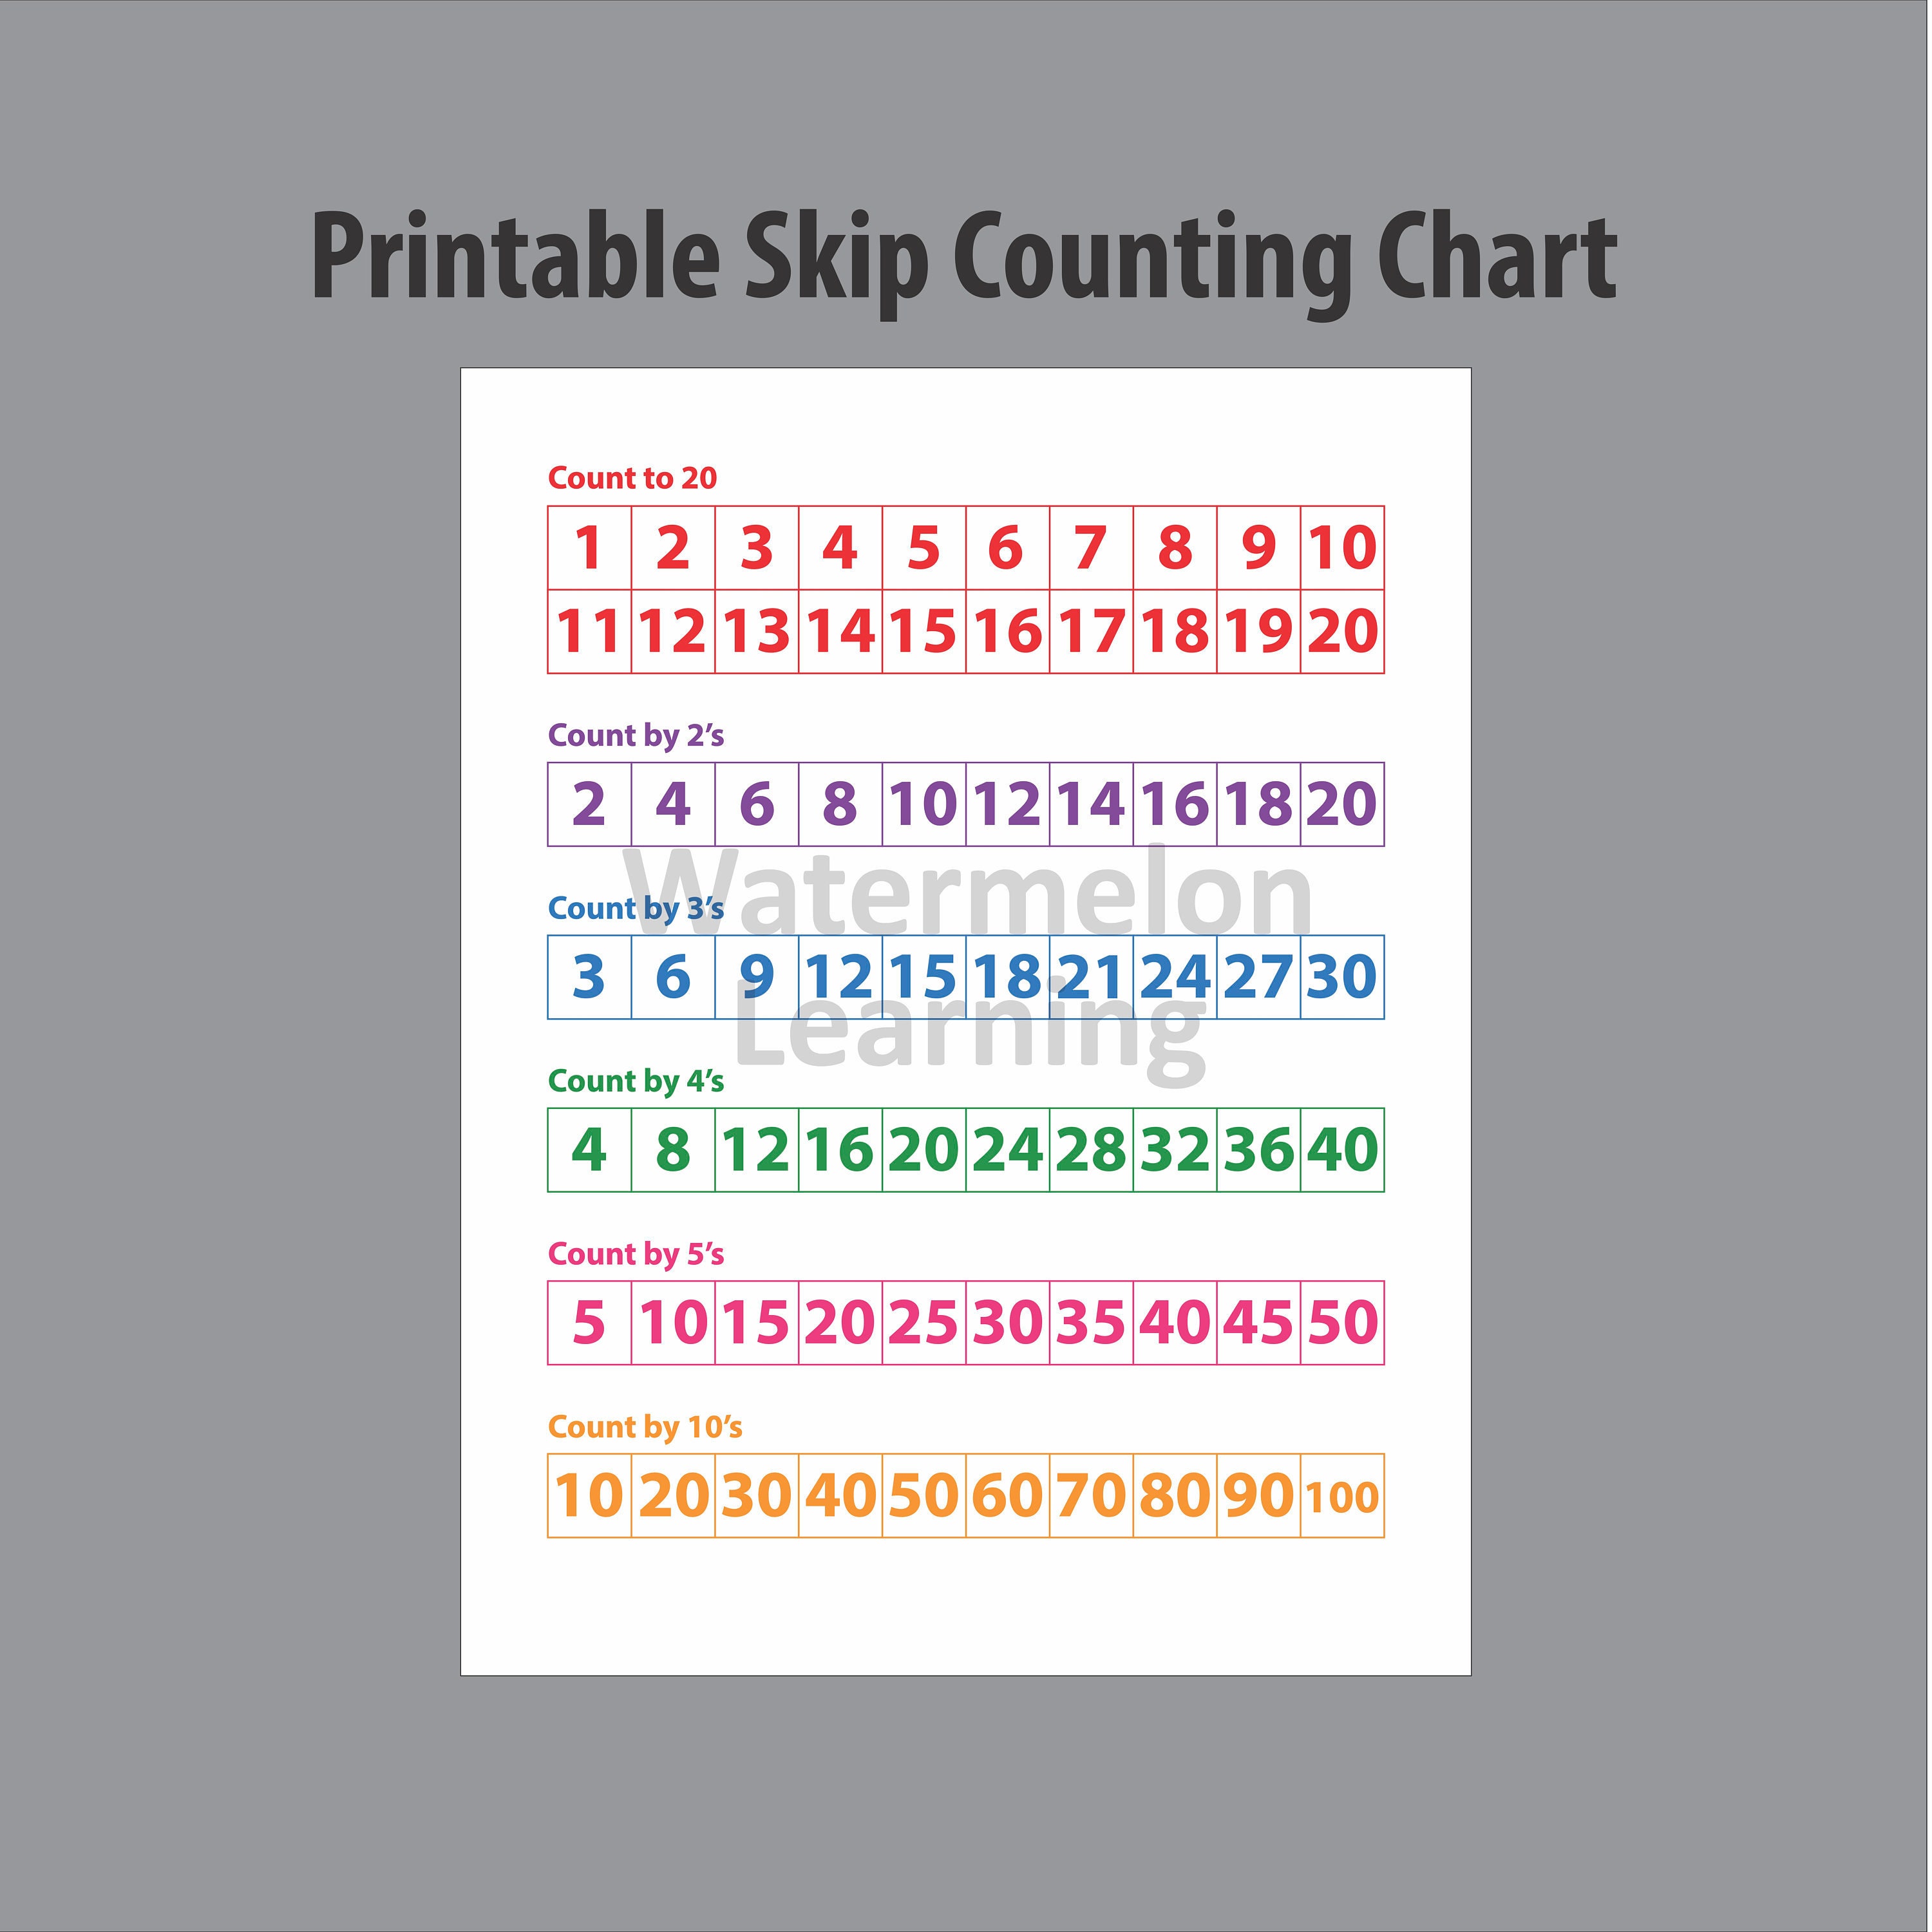 count-by-5s-chart